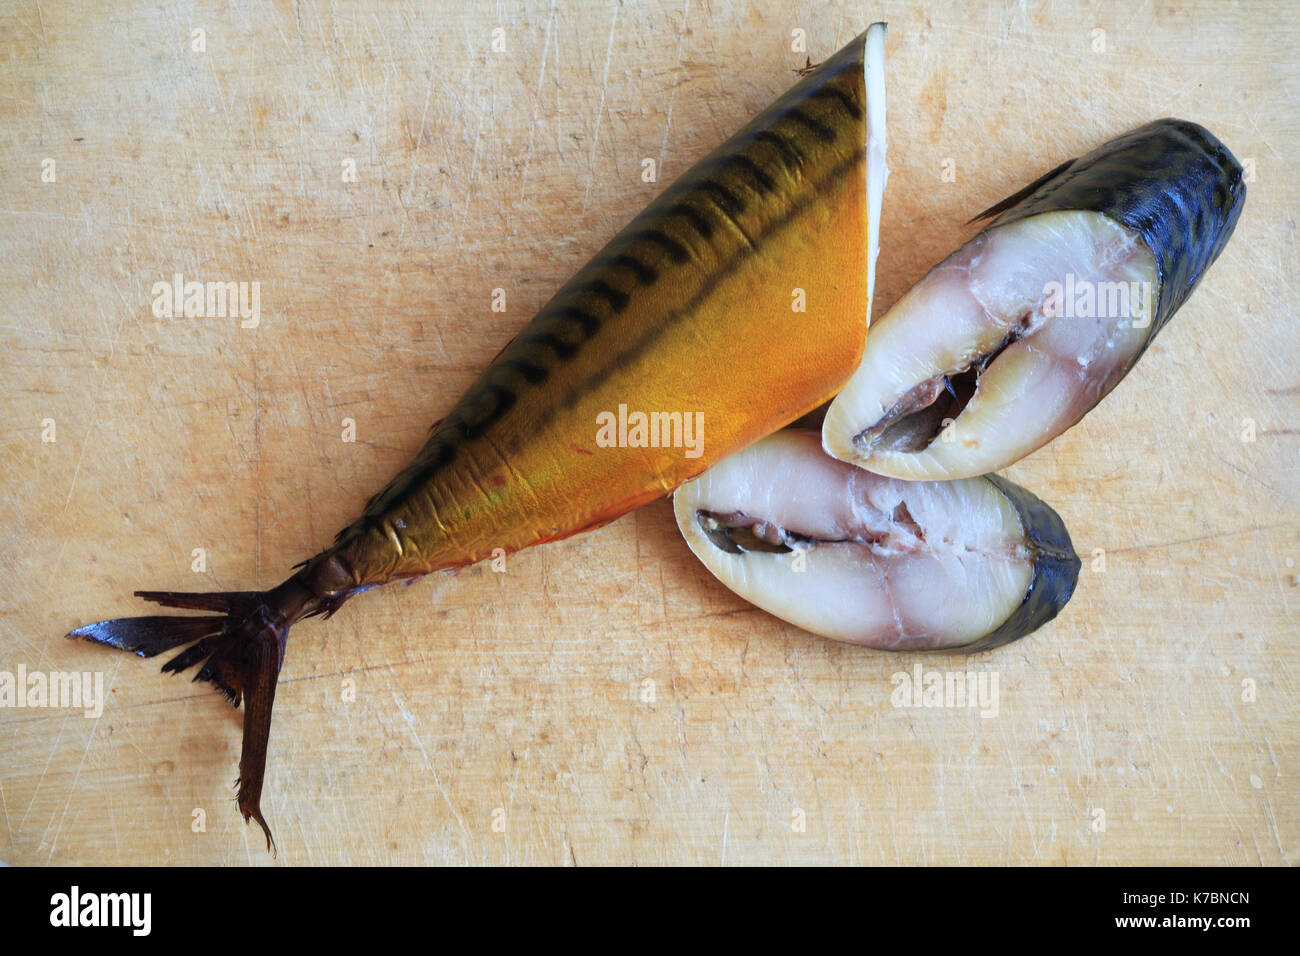 Sliced bloated fish on wooden board Stock Photo